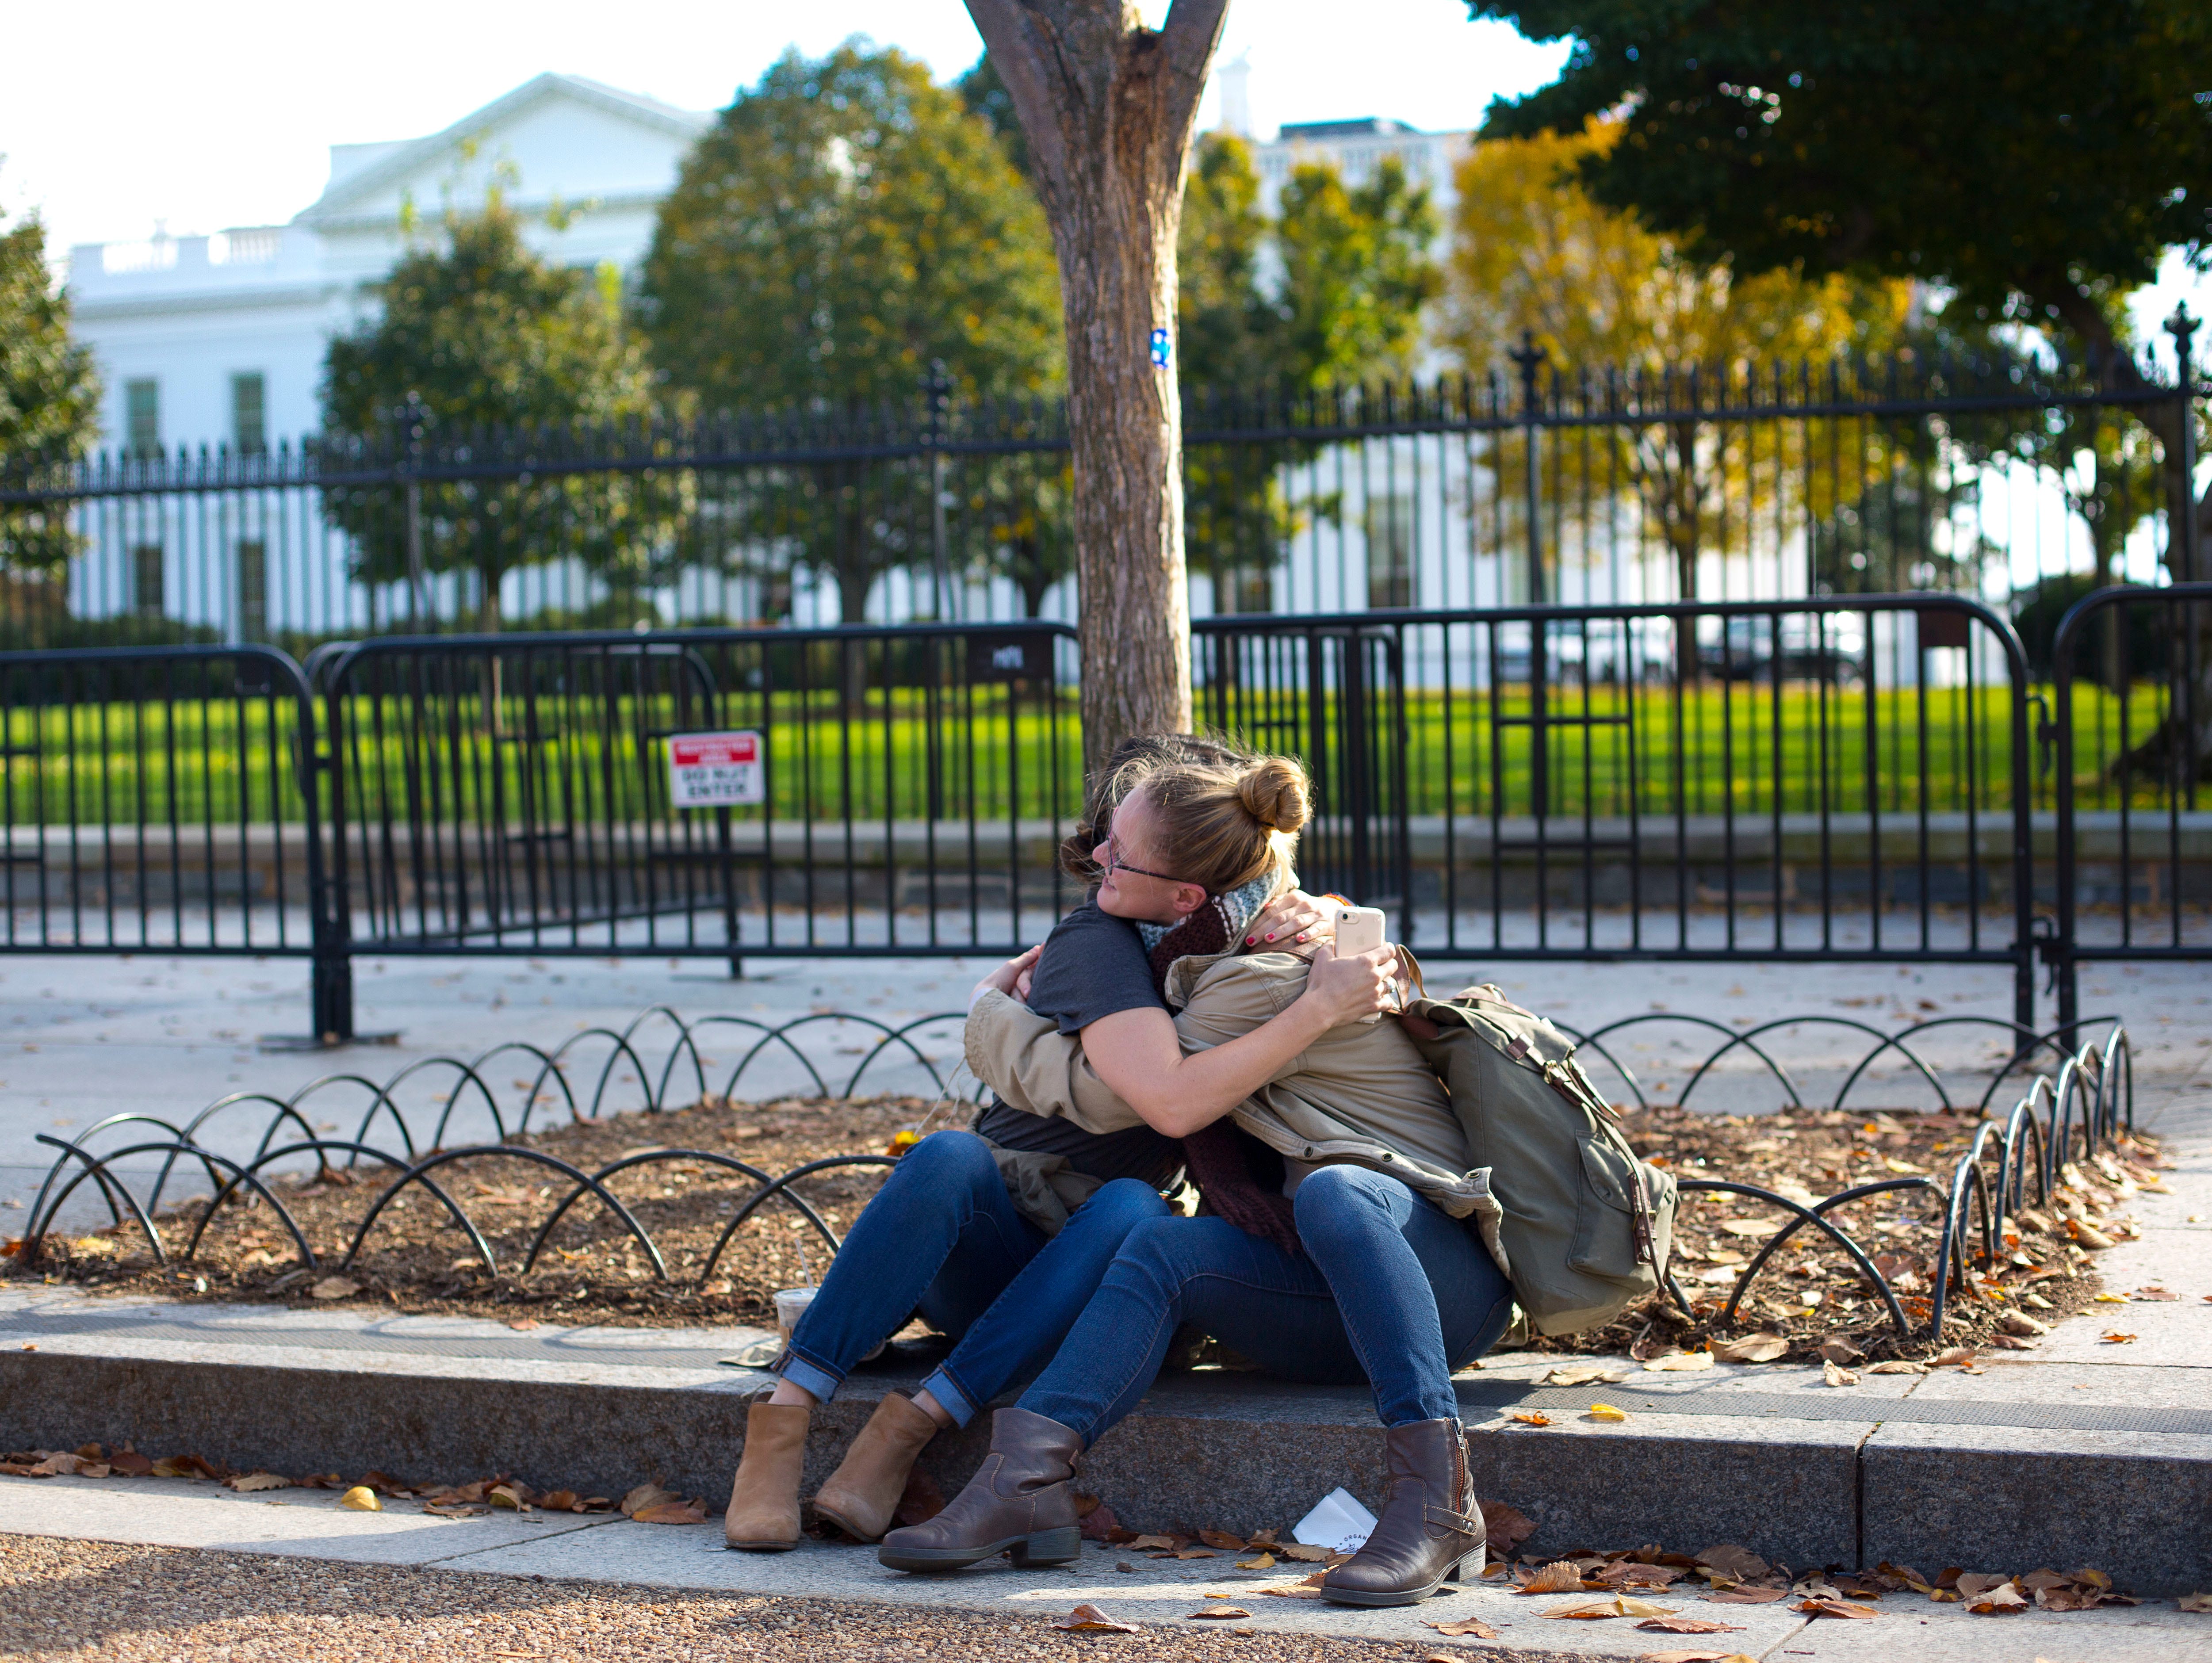 Jennie Armstrong, left, and Krister Cheriegate hug in front of the White House on Wednesday. The two women don't know each other but when Cheriegate saw Armstrong getting emotional she ask her is she need a hug.